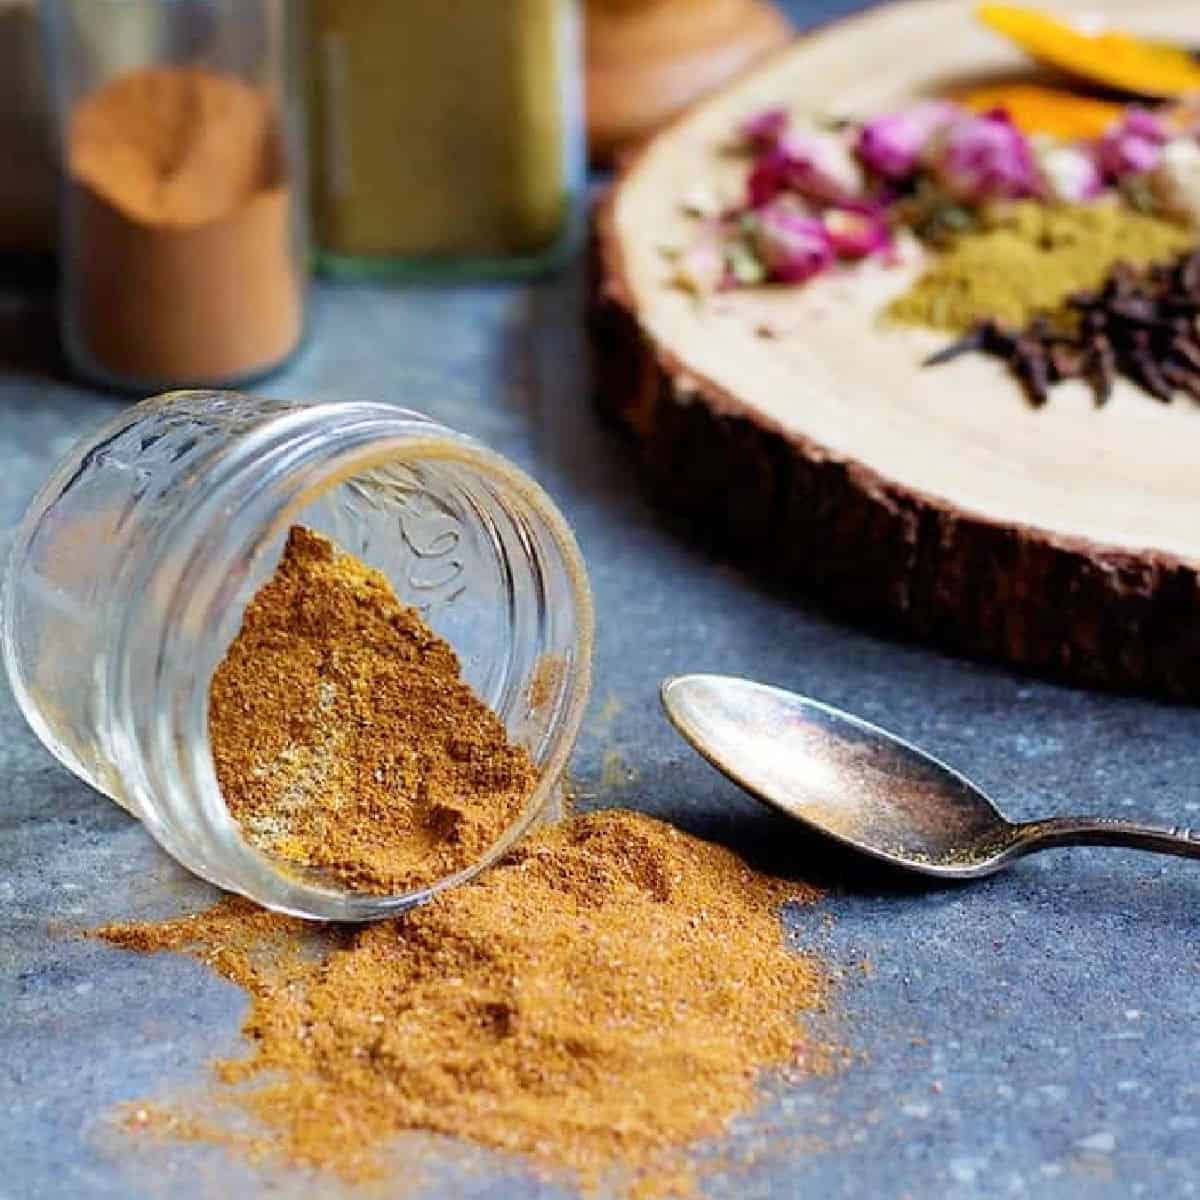 Advieh is a Persian spice mix made with several aromatic spices. Warm and flavorful spices such as cardamom, turmeric and cinnamon make the perfect mix for any recipe! 
